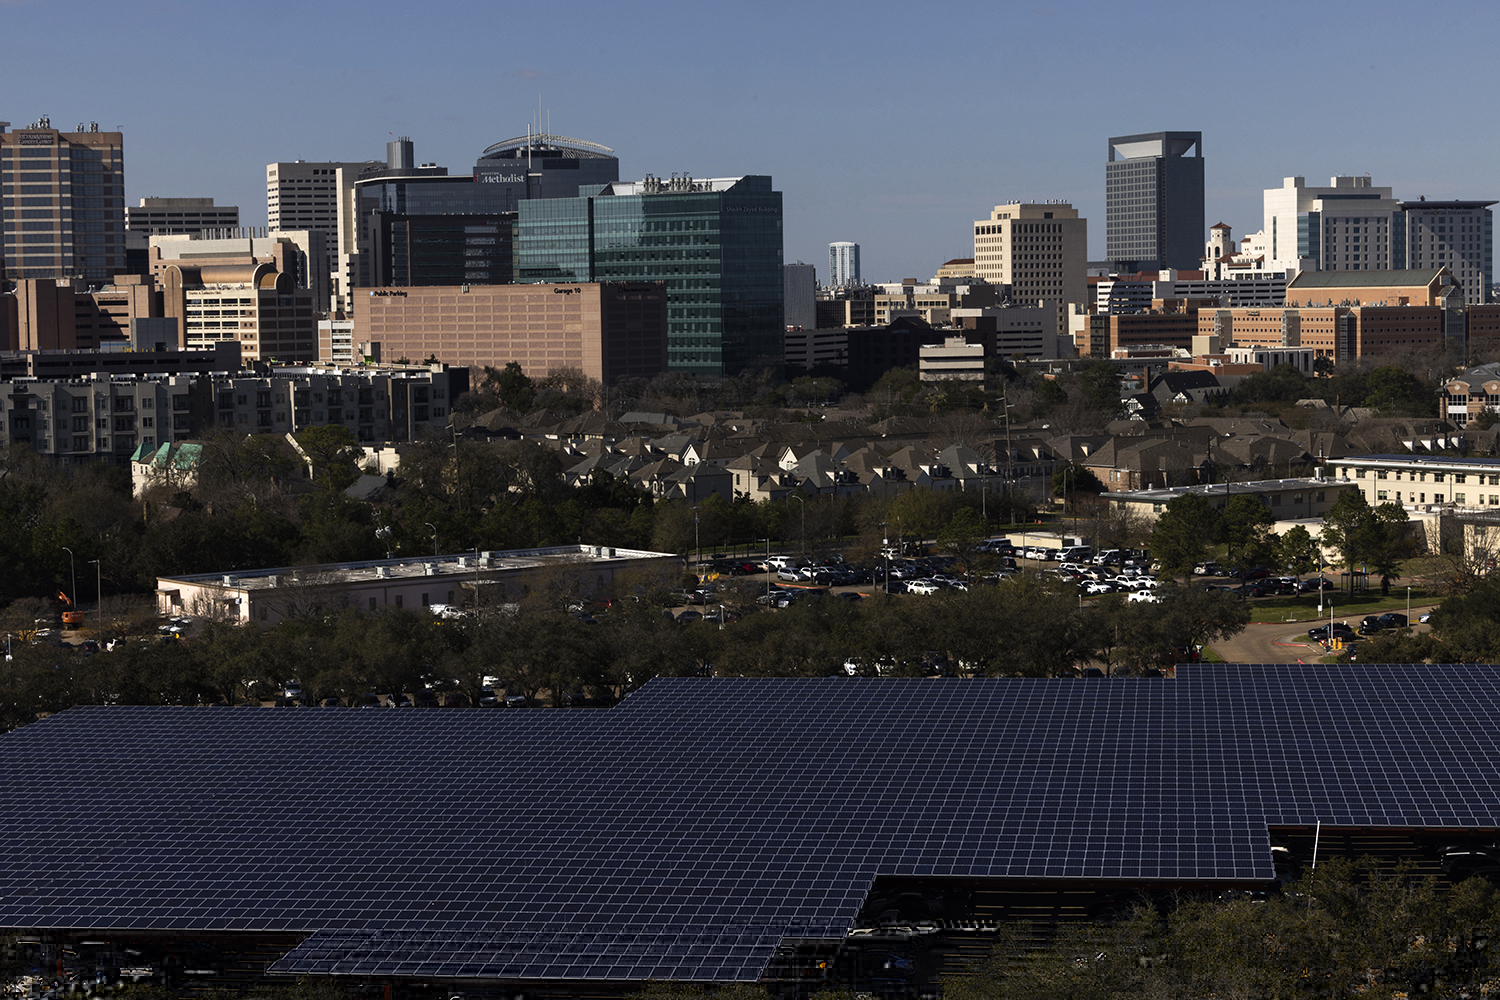 View of solar panels covering the parking lot of the Houston VA hospital campus with the view of the Texas Medical Center on the background.